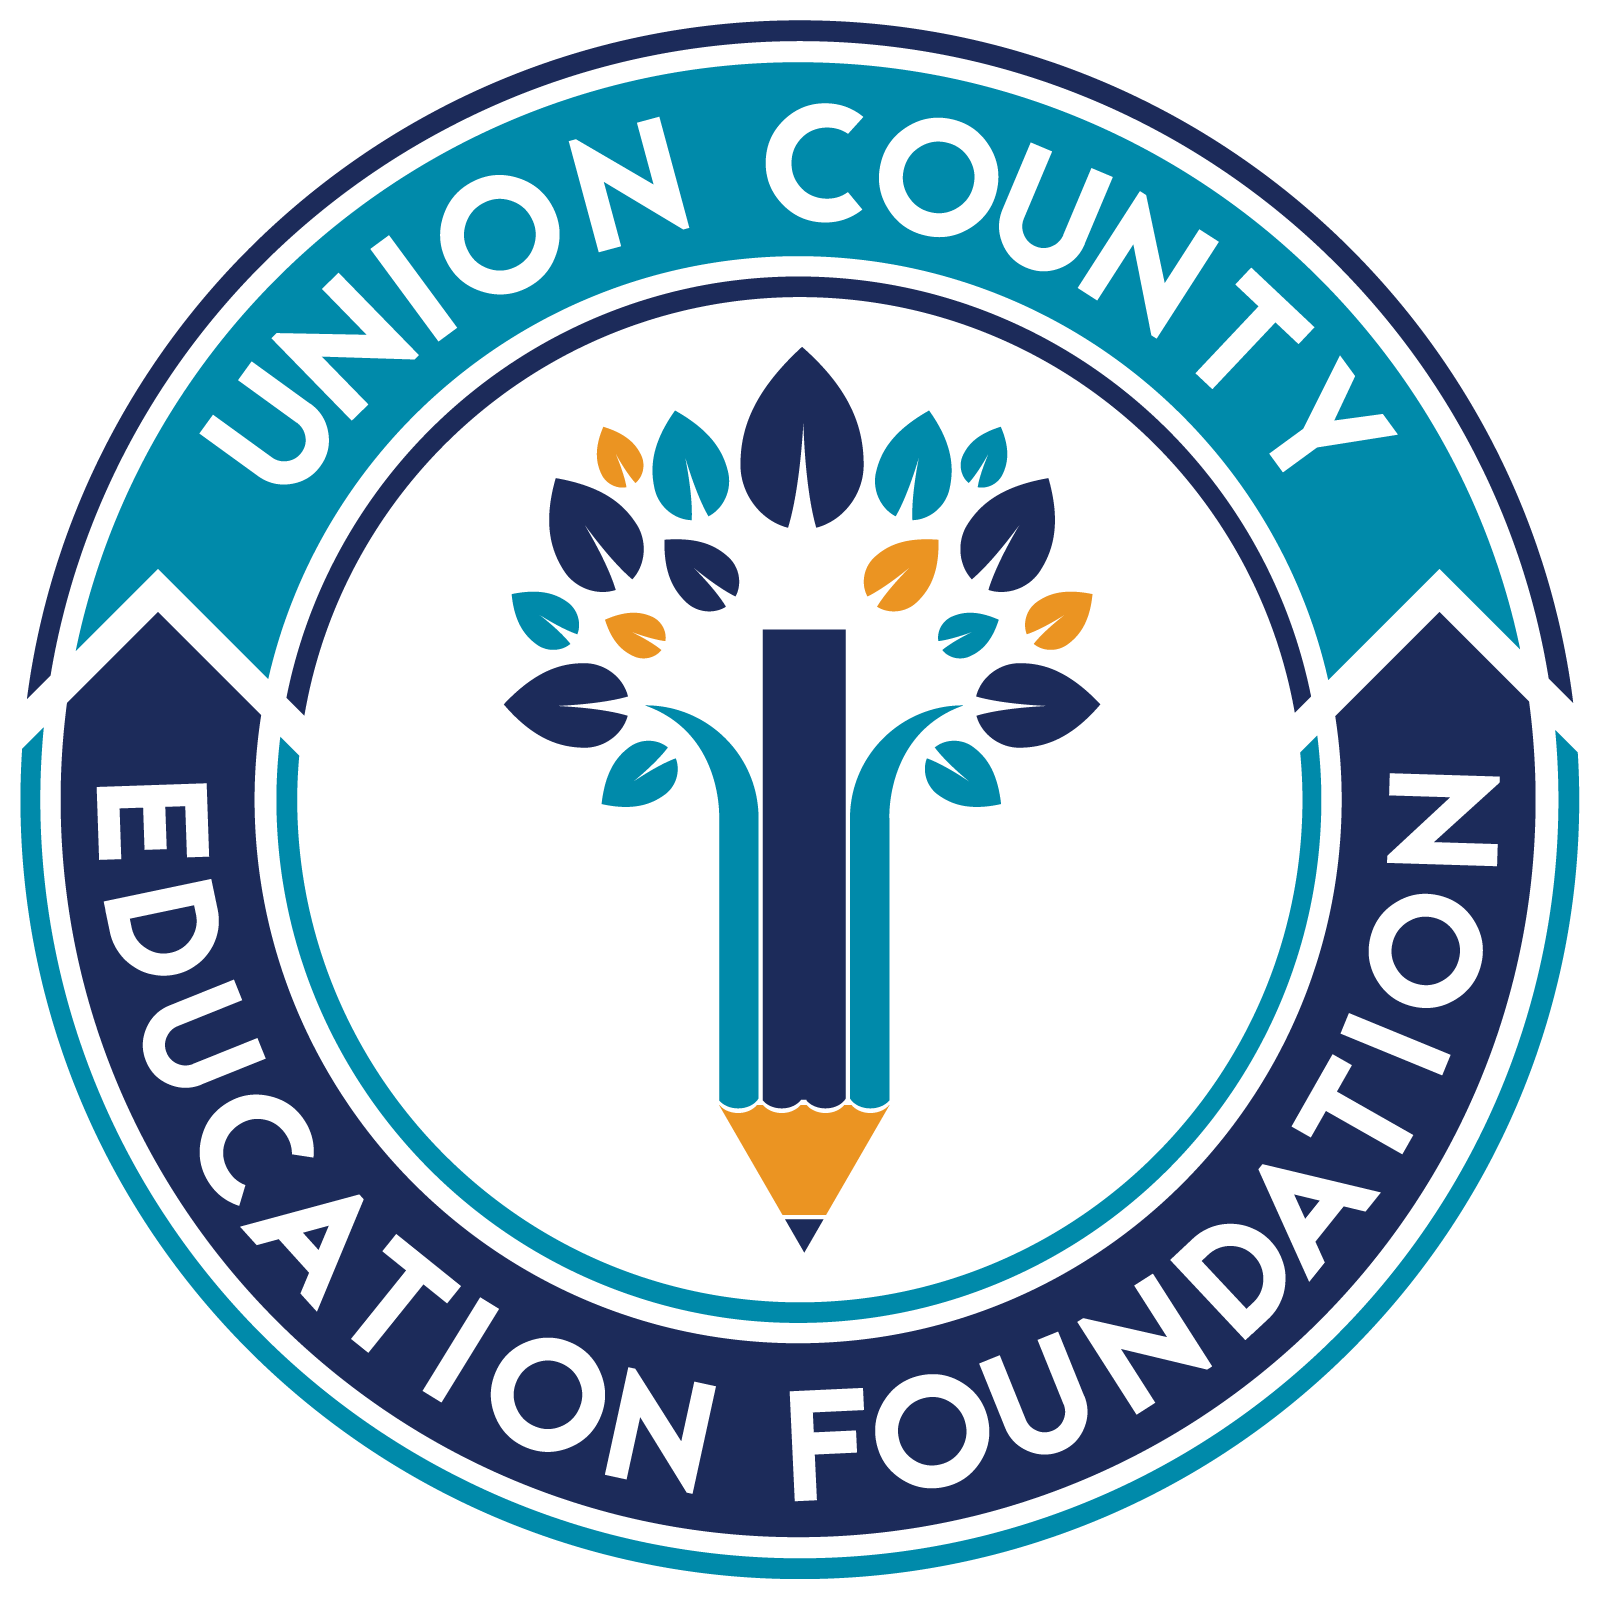 Image for Union County Education Foundation